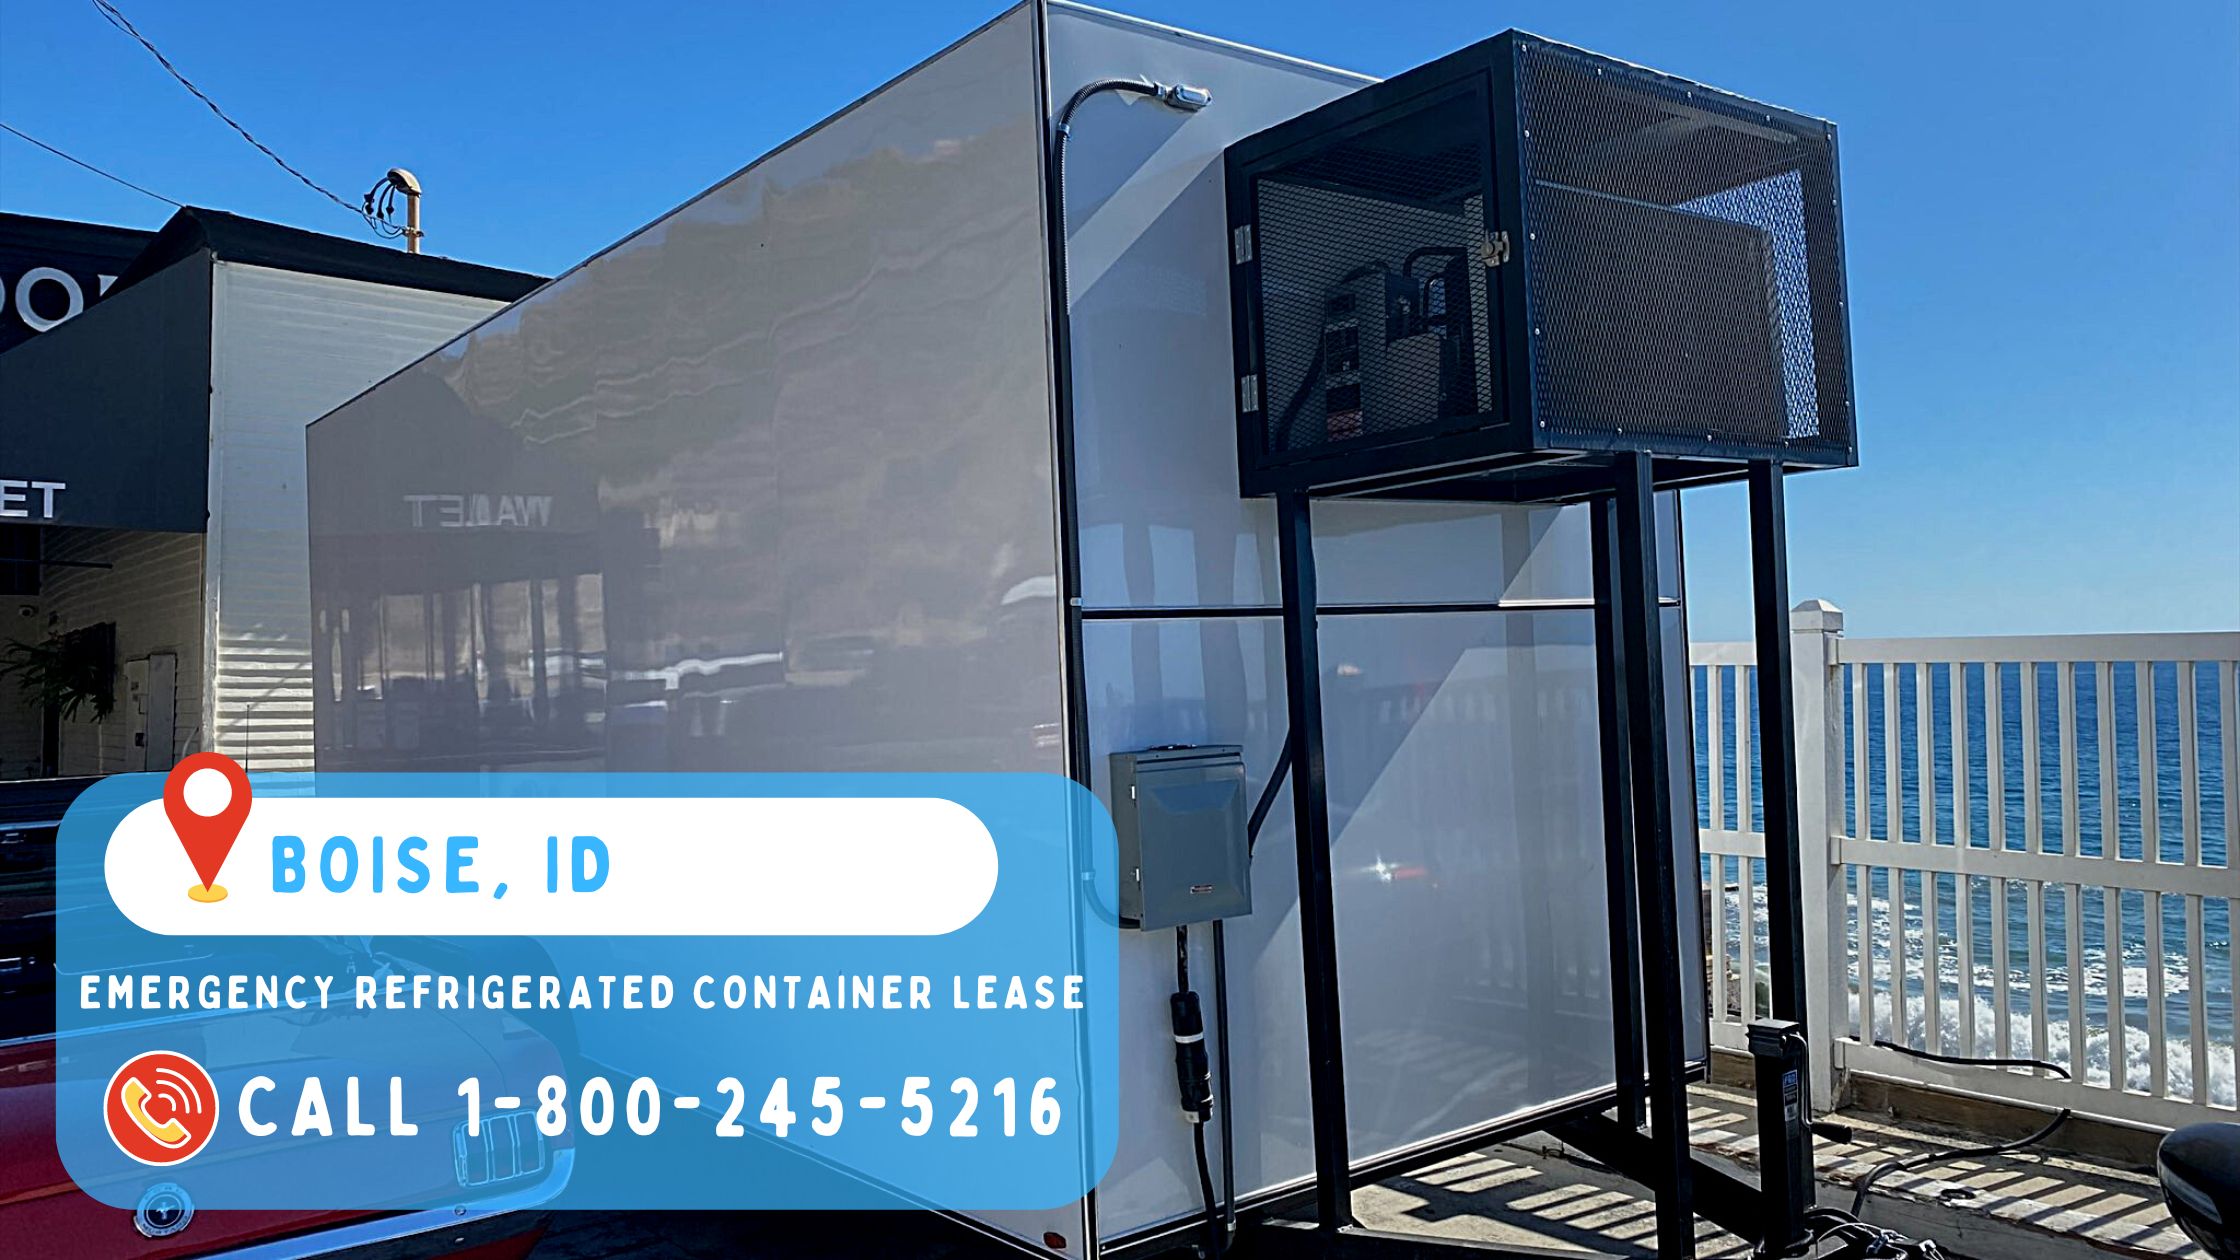 Emergency Refrigerated Container Lease in Boise, ID